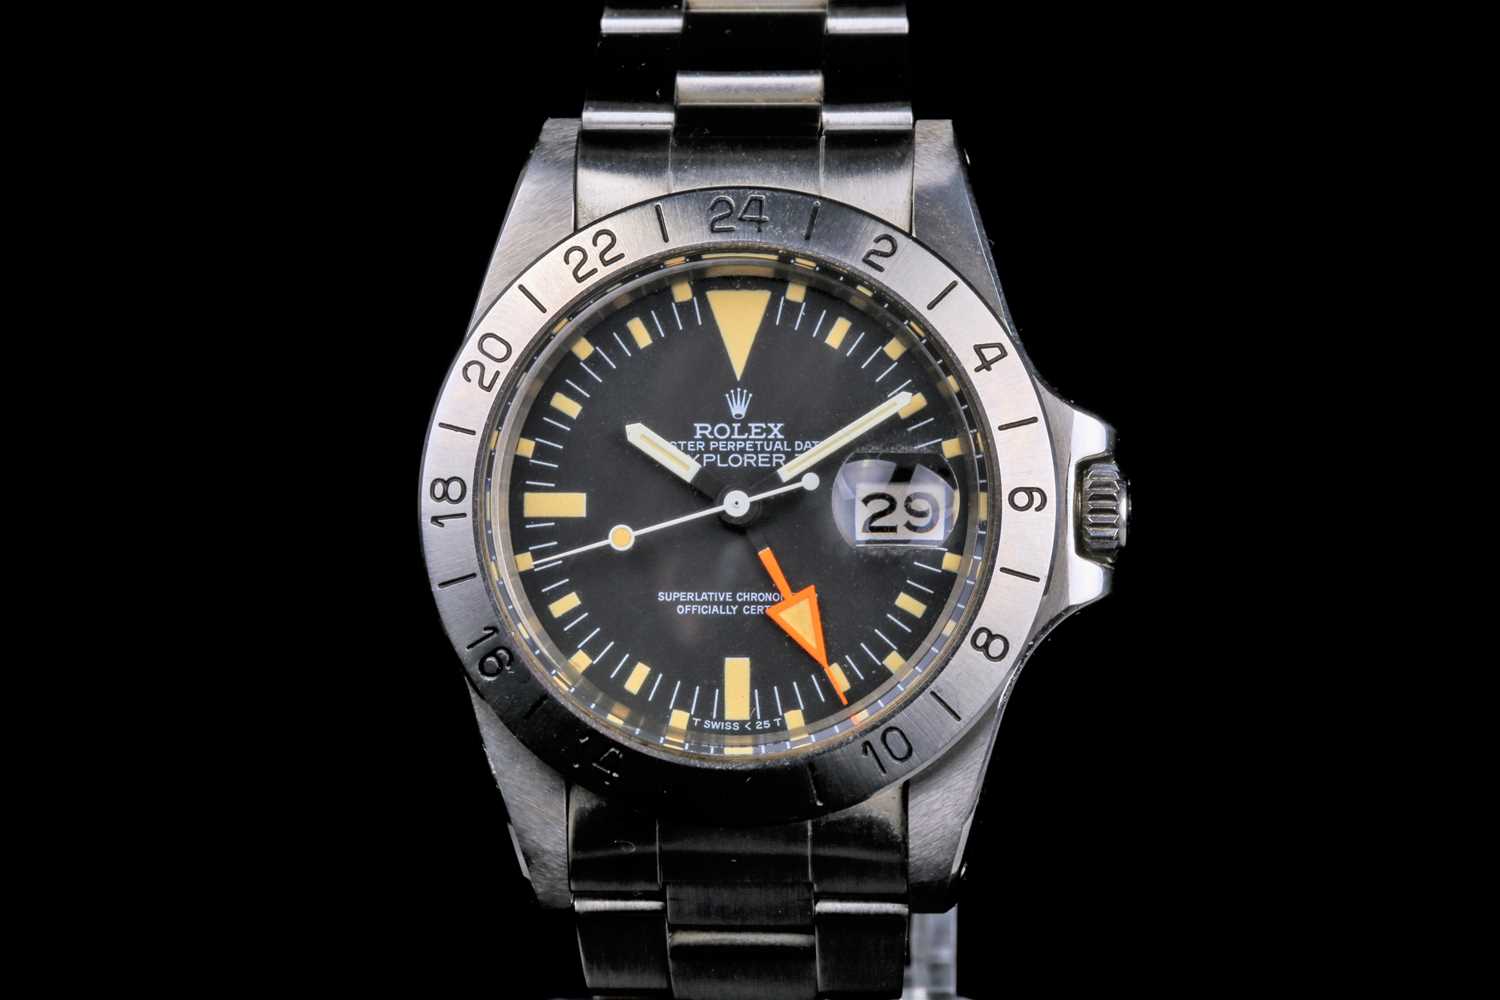 A 1982 Rolex Oyster Perpetual Date Explorer II. Sold for £25,000